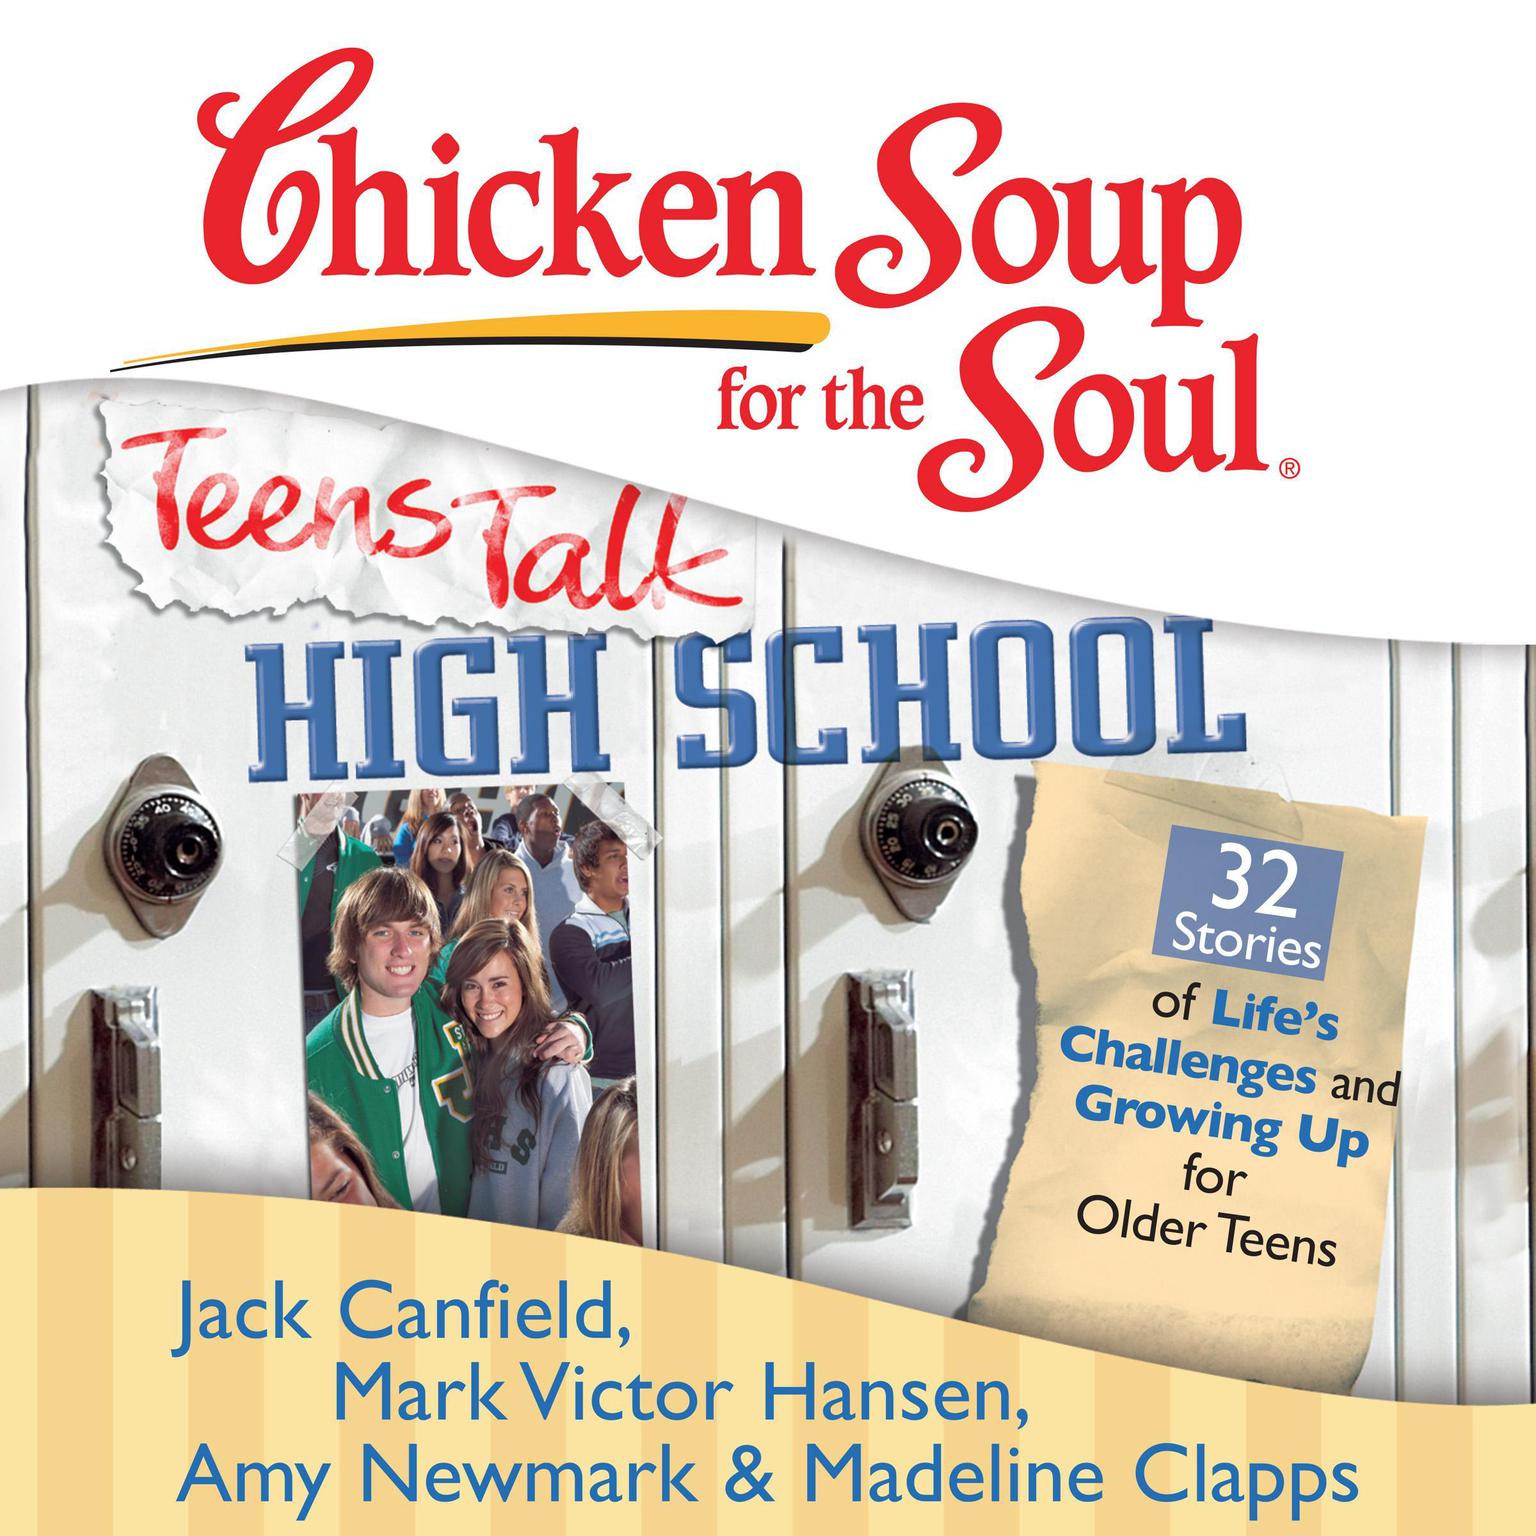 Chicken Soup for the Soul: Teens Talk High School - 32 Stories of Lifes Challenges and Growing Up for Older Teens Audiobook, by Jack Canfield